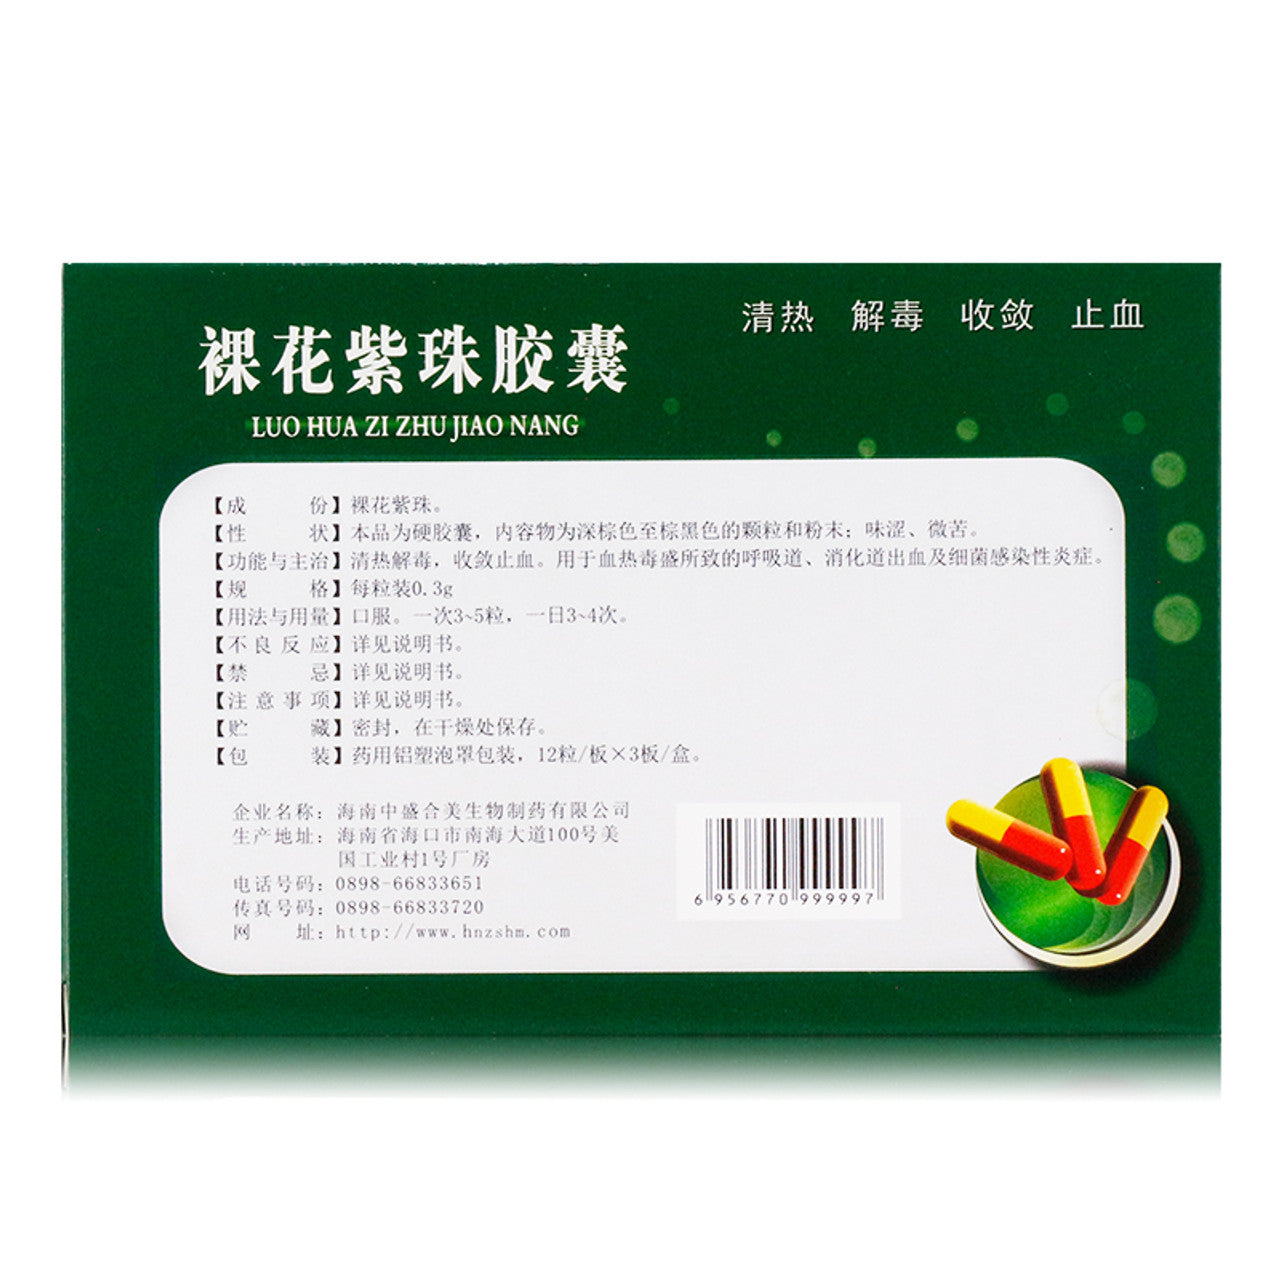 China Herb. Brand LI REN BAI NIAN. LUO HUA ZI ZHU JIAO NANG or Luohua Zizhu Jiaonang or LuoHuaZiZhuJiaoNang or Luo Hua Zi Zhu Capsules or Luohua Zizhu Capsules for bacterial infection, acute infectious hepatitis, respiratory and digestive tract bleeding.